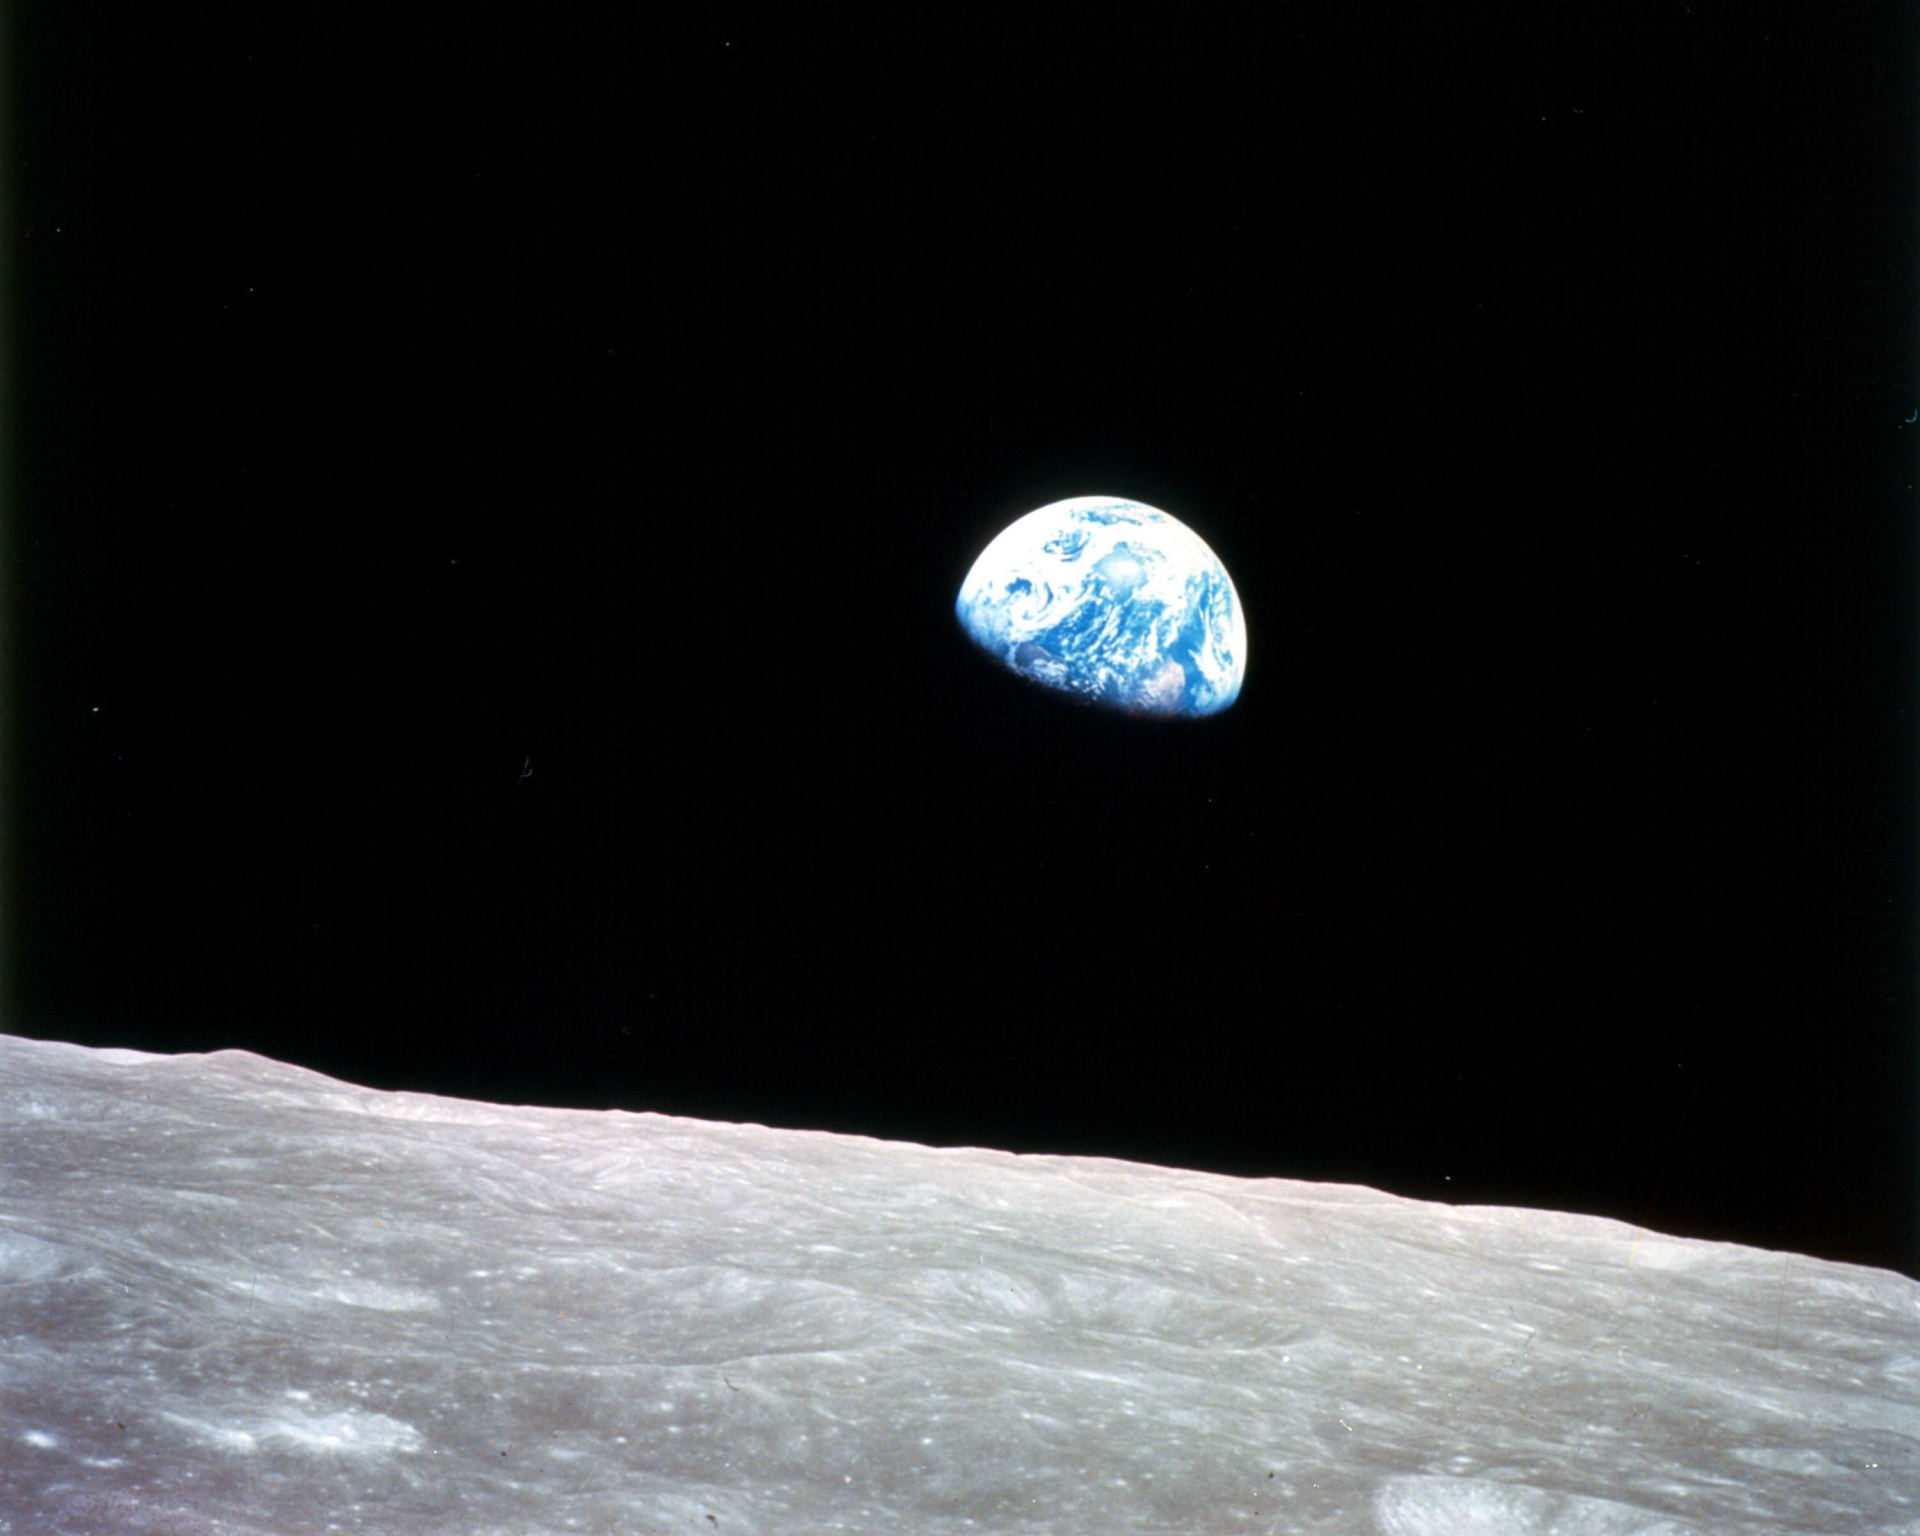 This photograph, titled "Earthrise" was captured by Apollo 8 lunar module pilot Bill Anders during the first human voyage around the moon on Dec. 24, 1968. Anders flew around the moon with Apollo 8 commander Frank Borman and command module pilot Jim Lovell as they witnessed the Earth rising above the lunar surface.